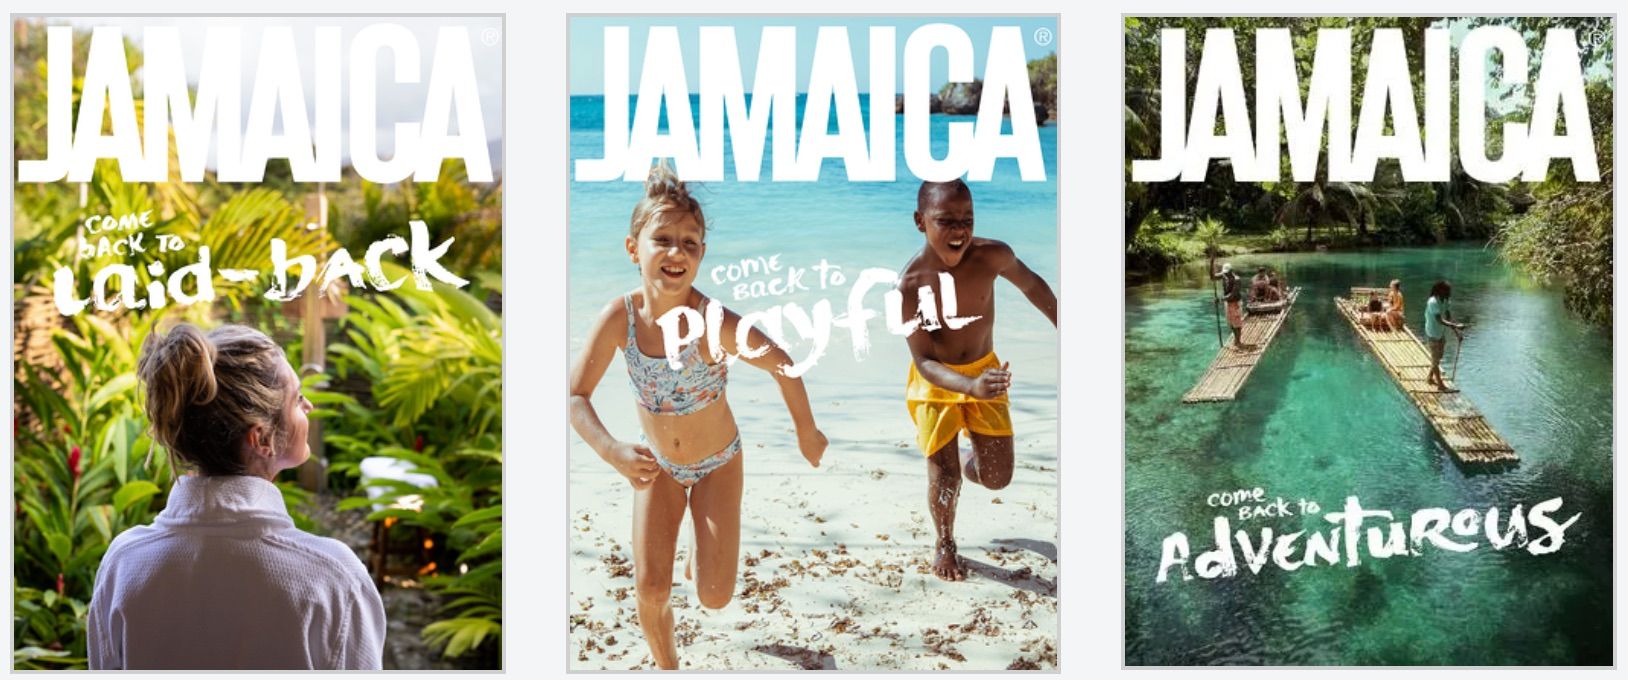 Jamaica-launches-new-‘Come-Back’-ad-campaign-2.jpg